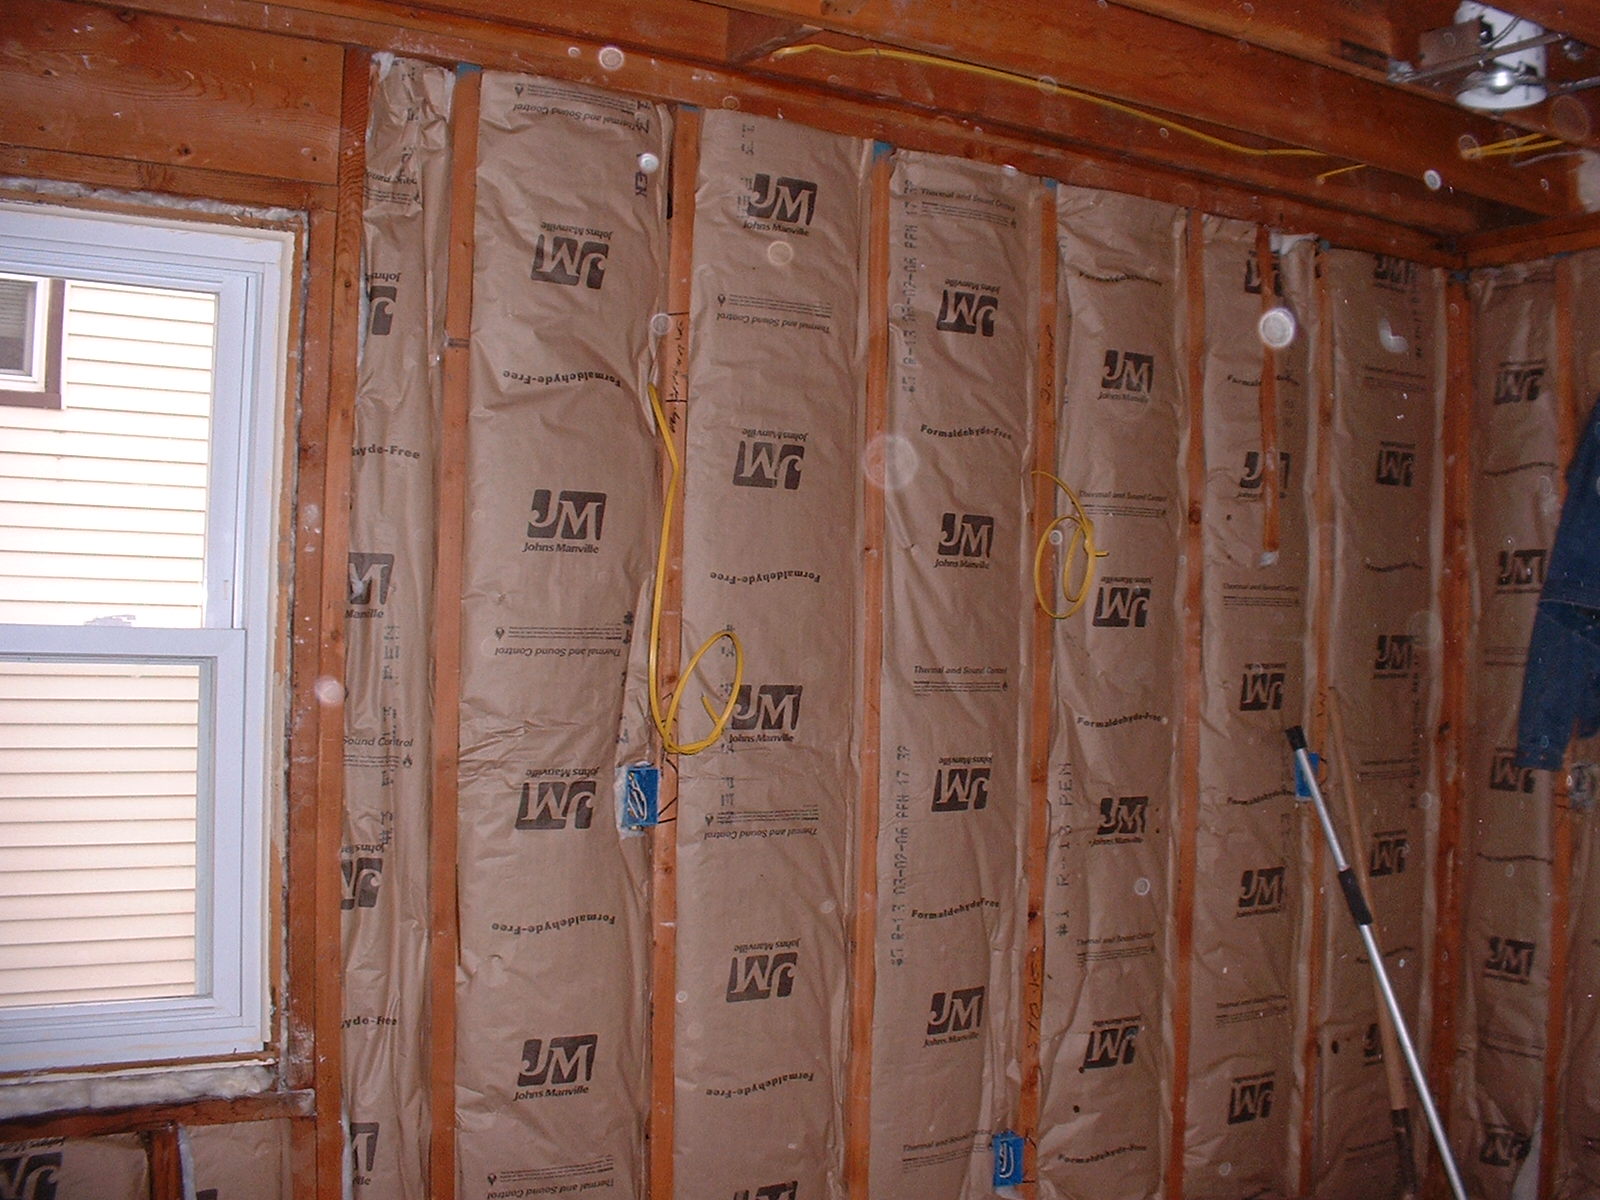 All of the insulation was replaced on the outer walls.